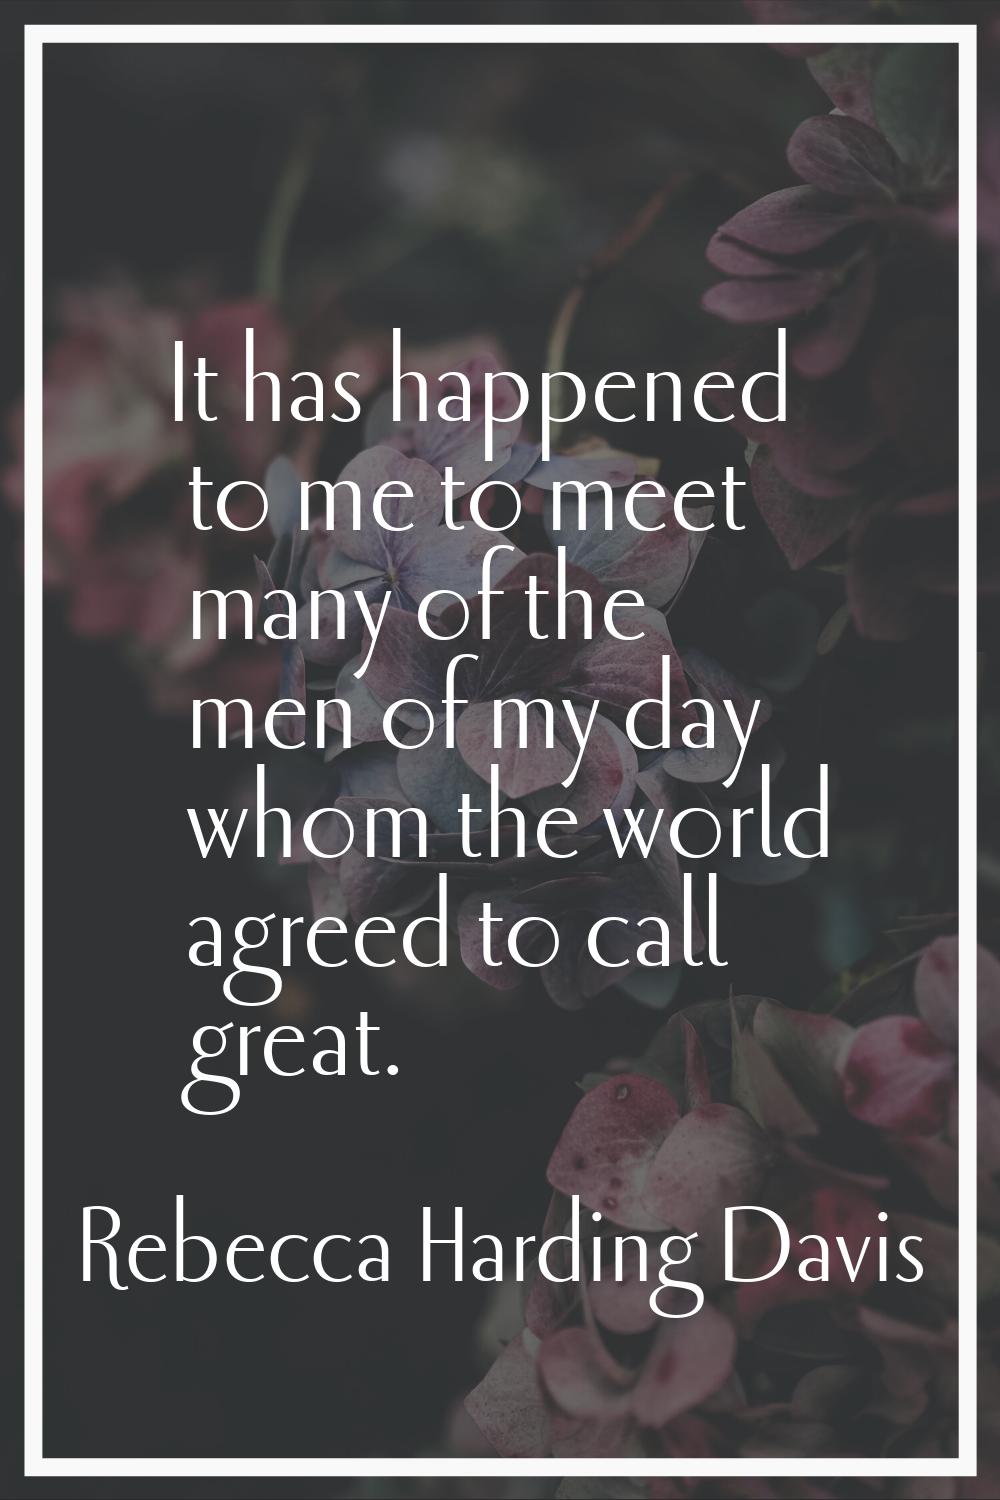 It has happened to me to meet many of the men of my day whom the world agreed to call great.